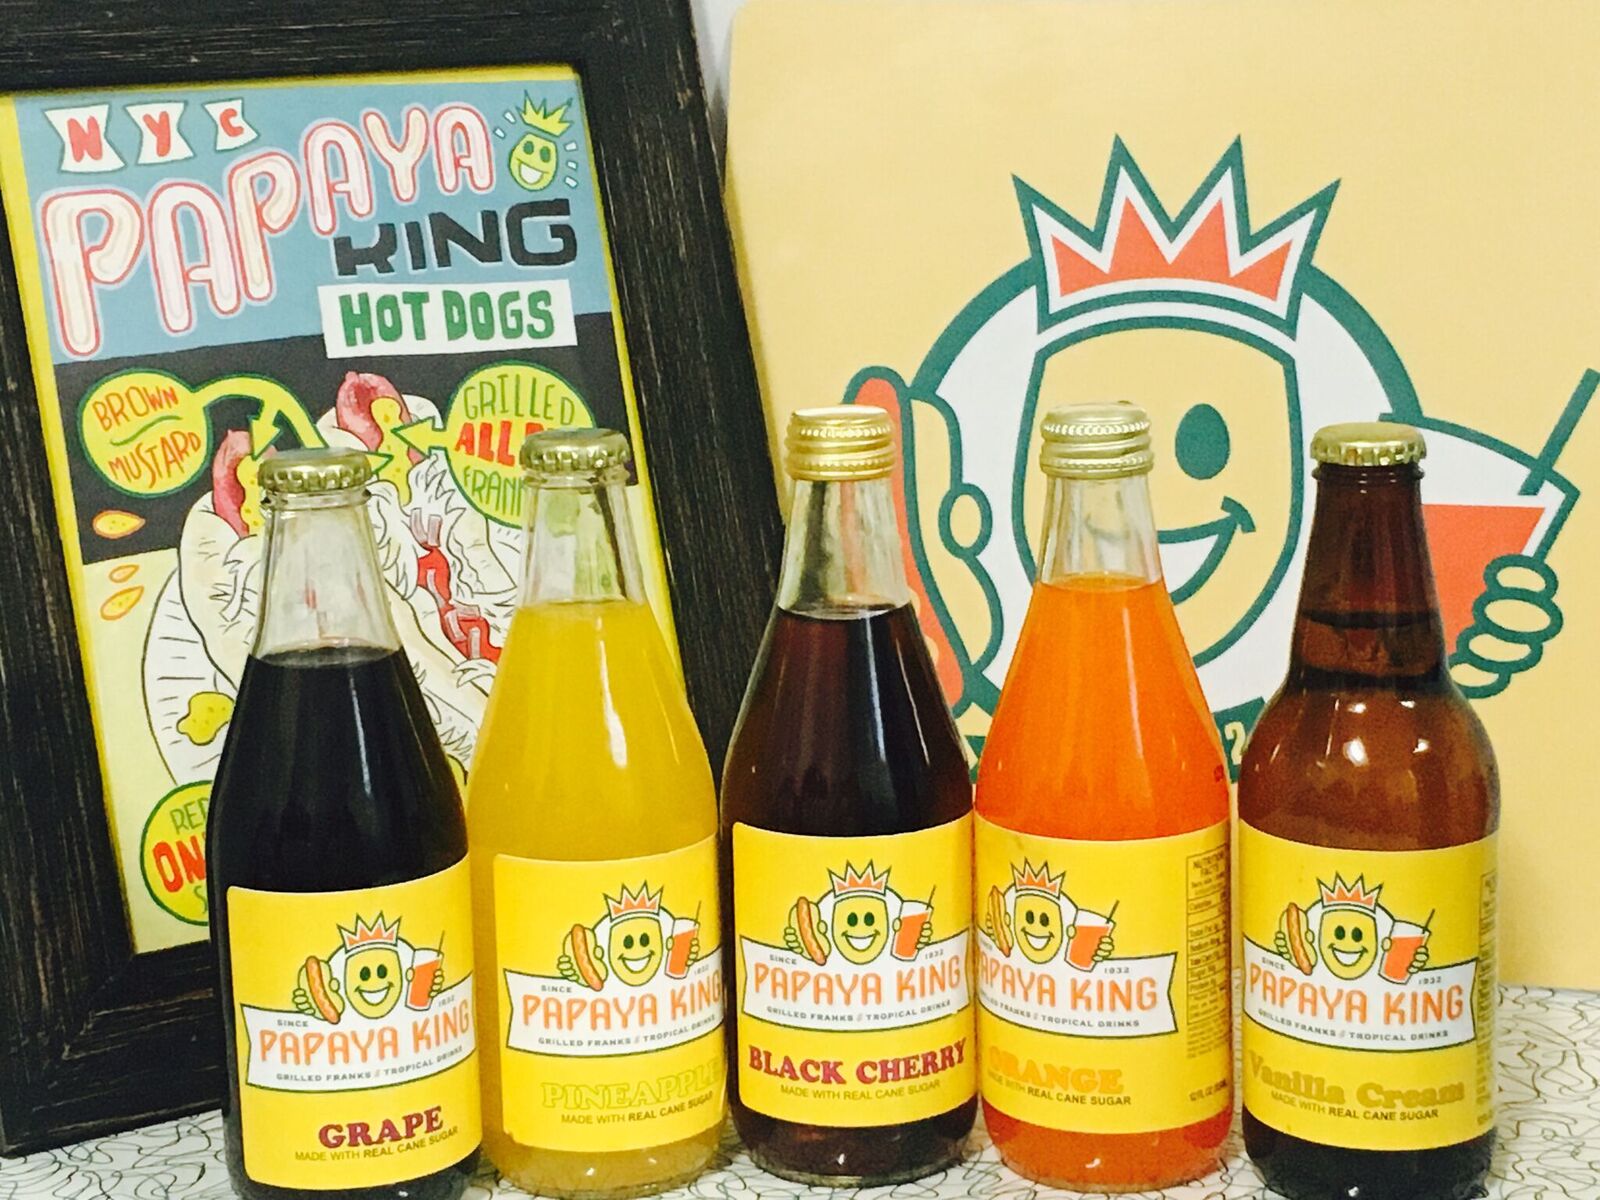 EV Grieve: Papaya King, now with its own bottled sodas